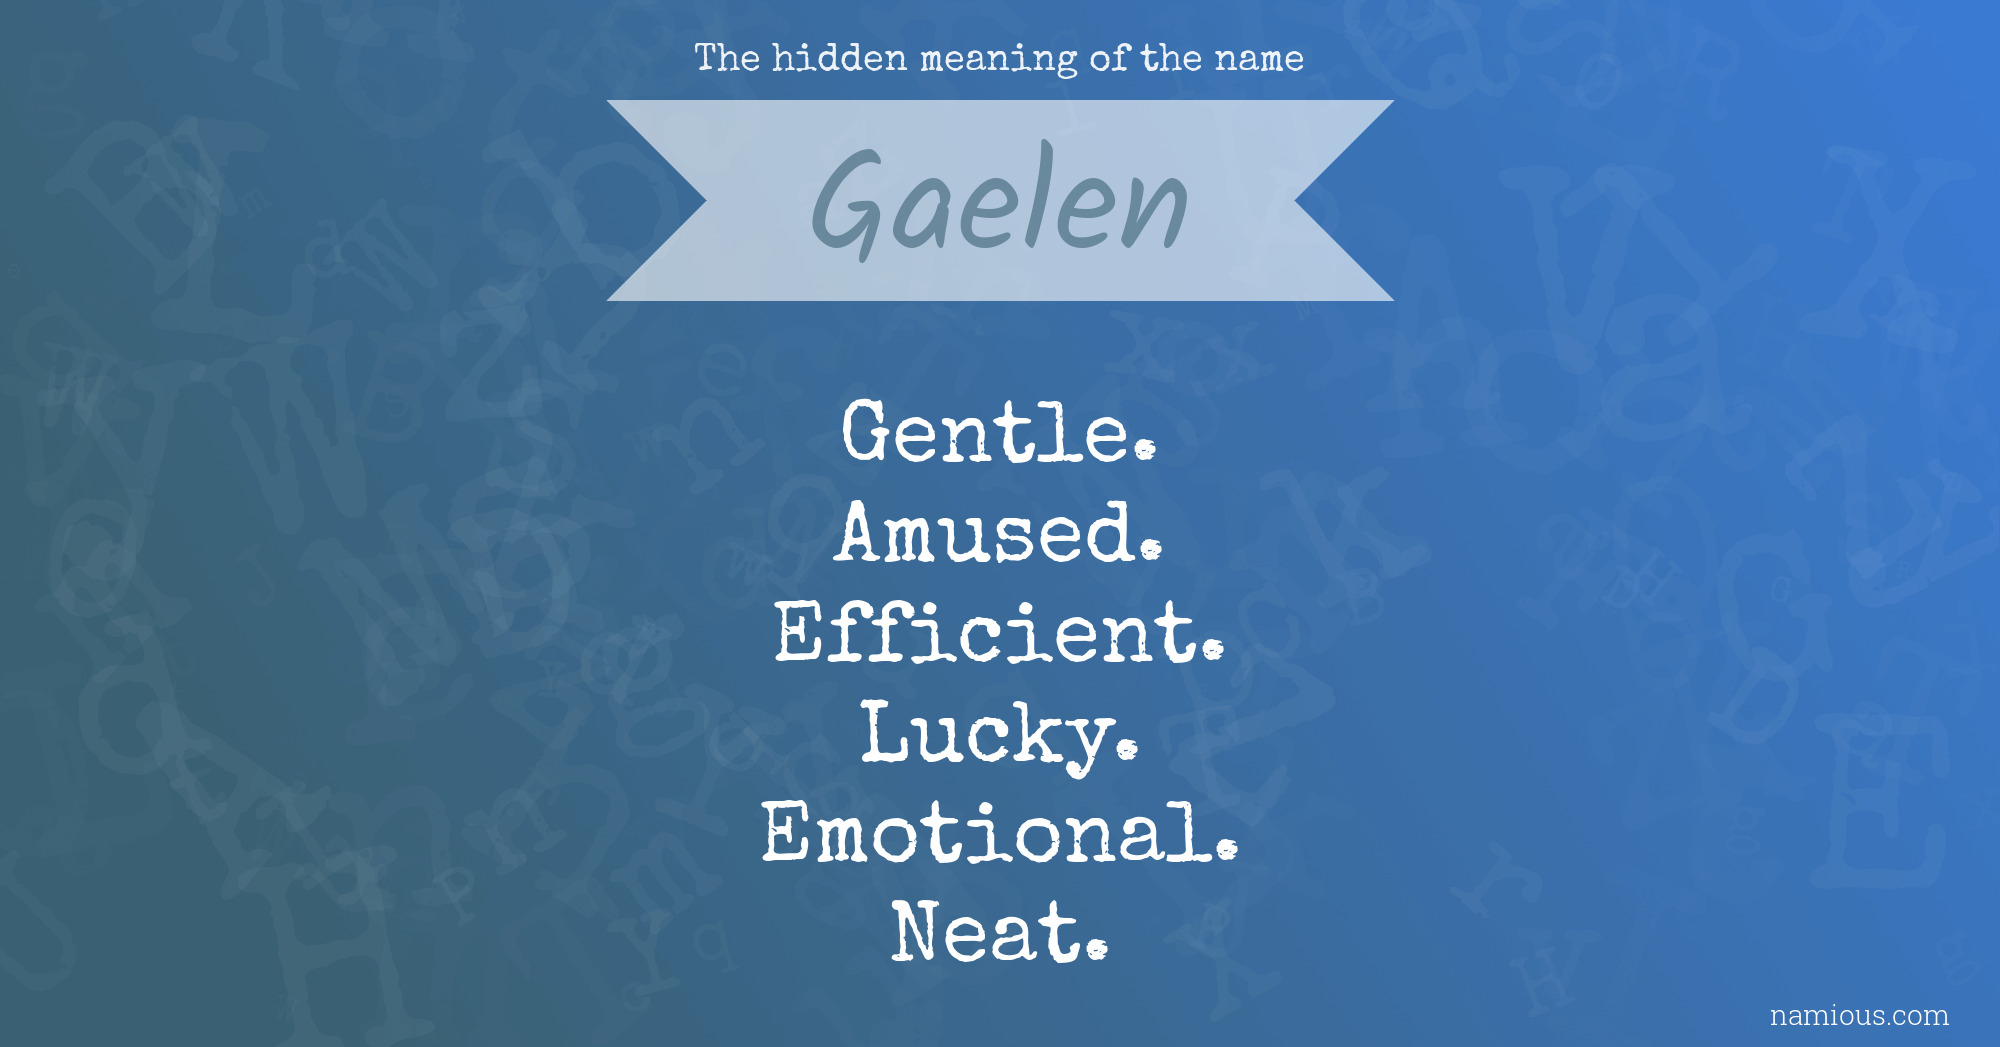 The hidden meaning of the name Gaelen